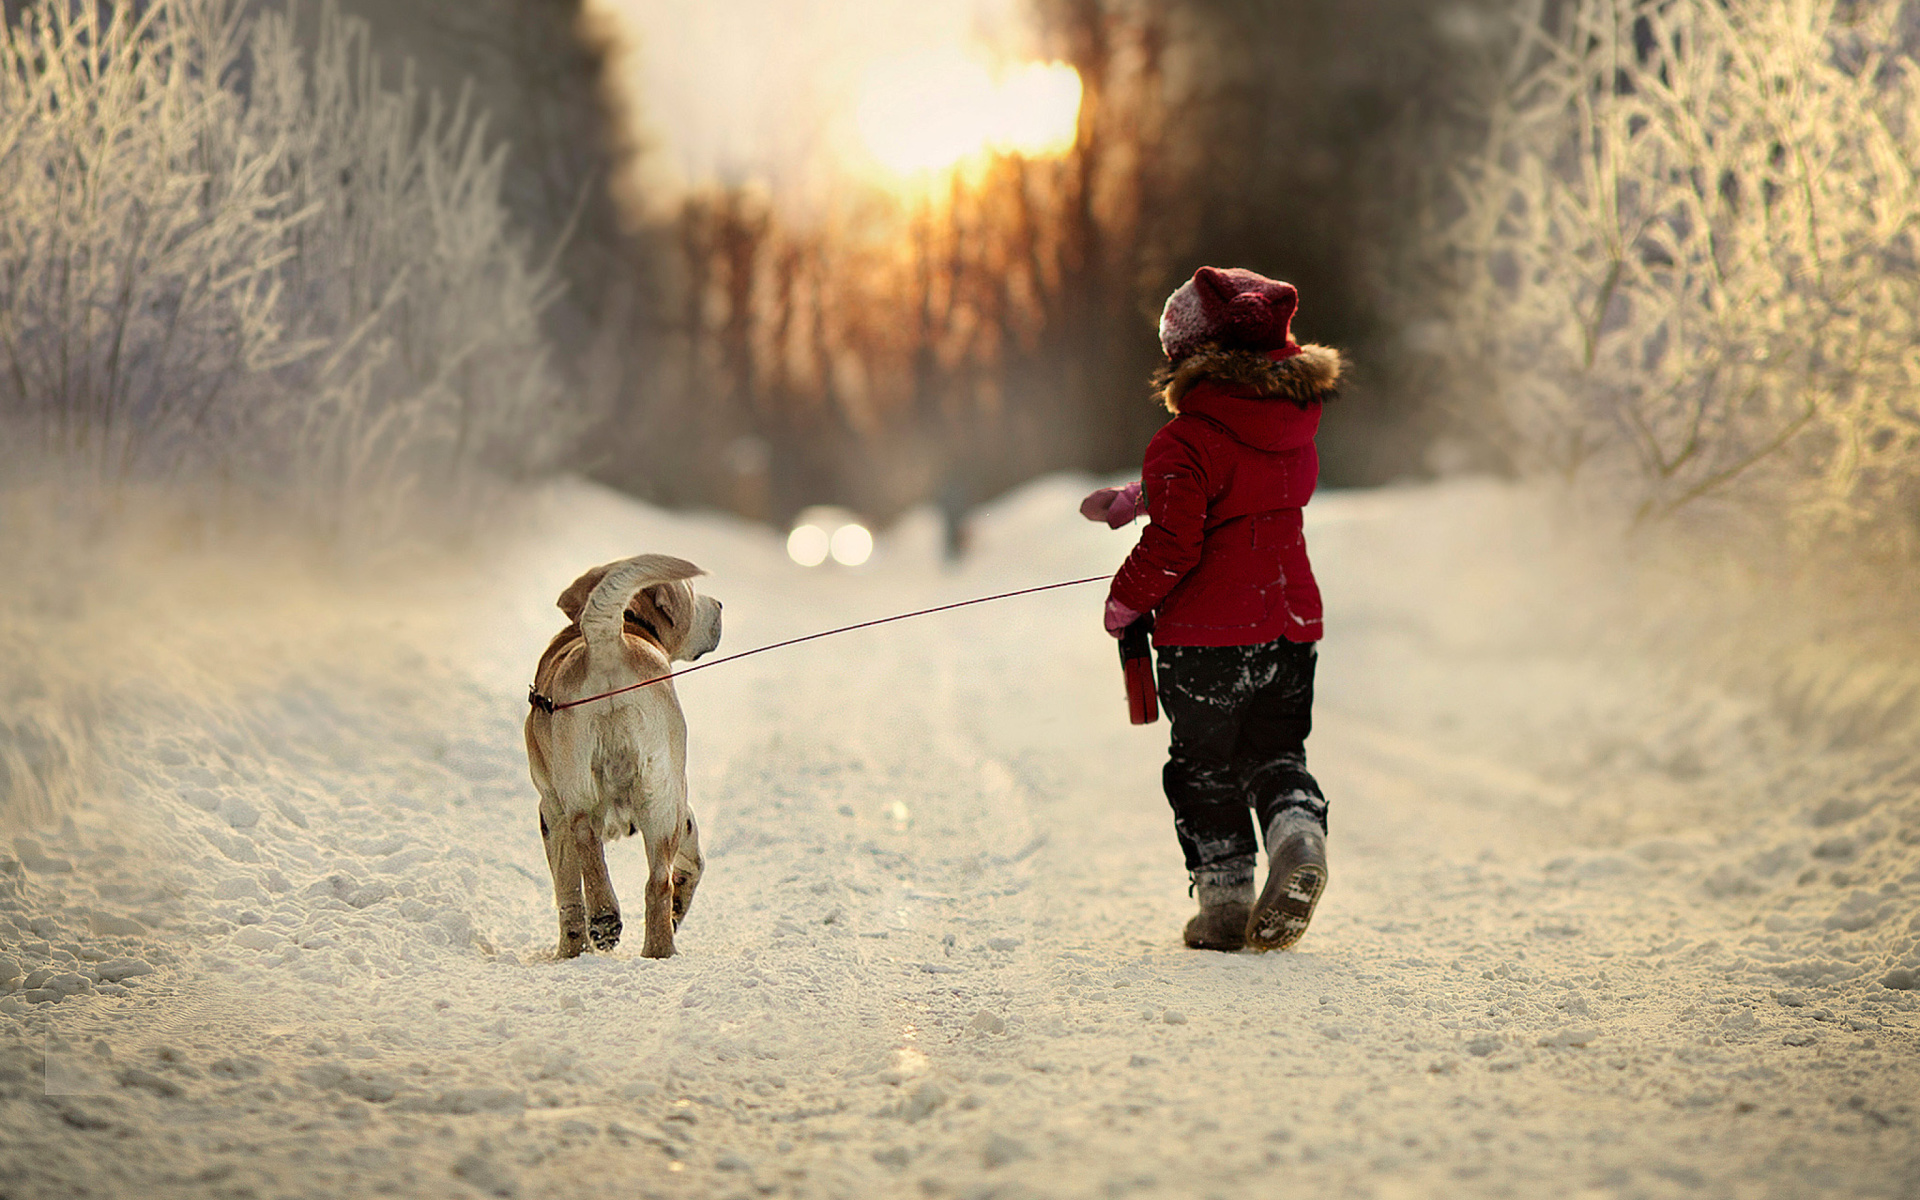 Winter Walking with Dog wallpaper 1920x1200